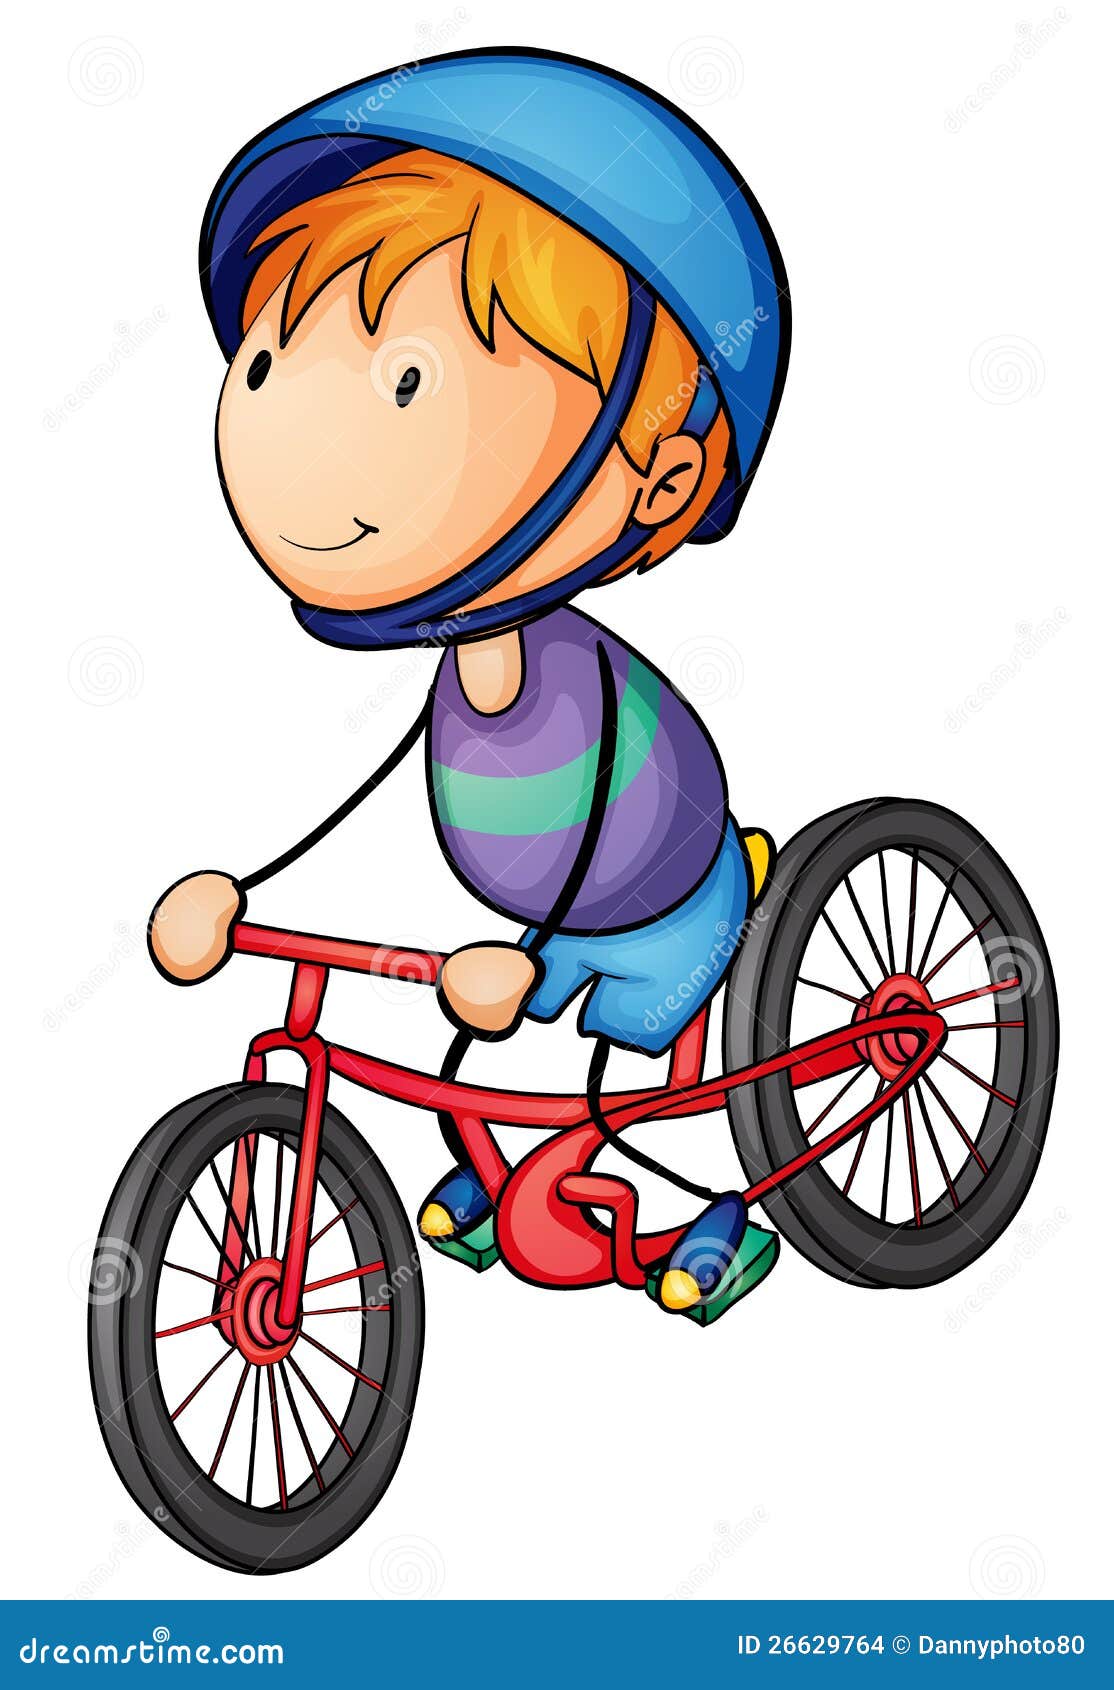 clipart bicycle riding - photo #35